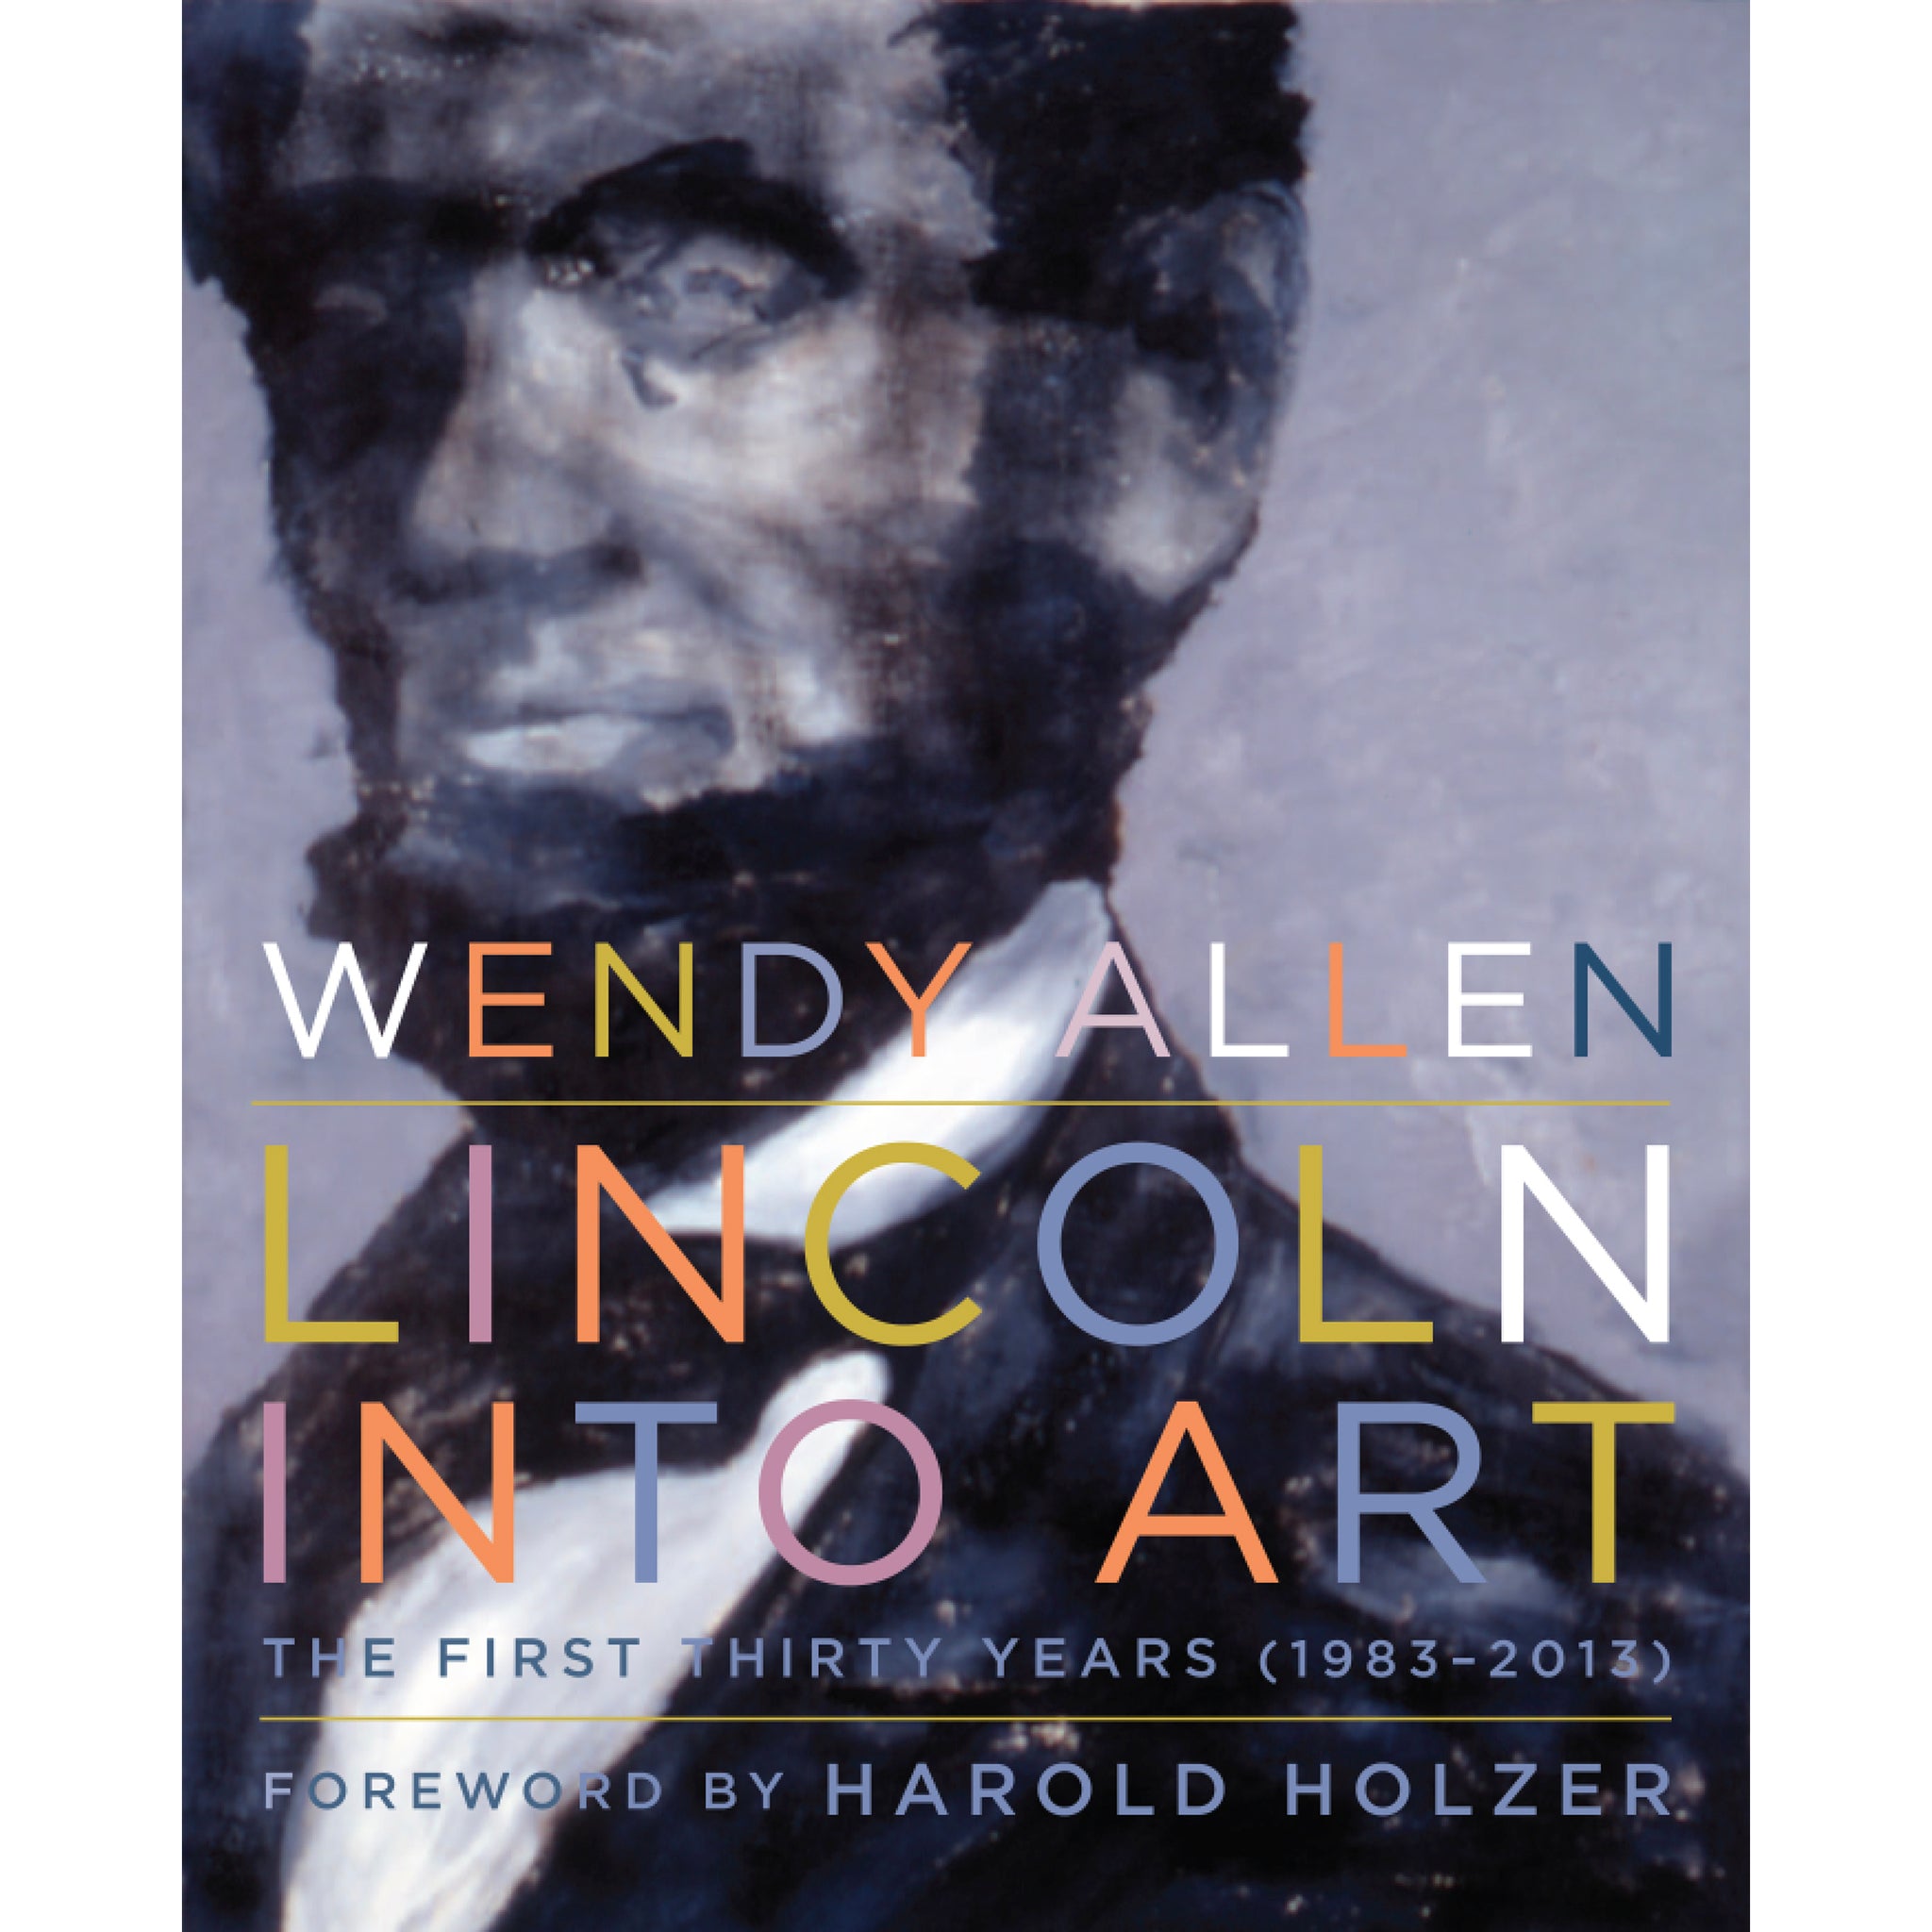 Lincoln Into Art: The First Thirty Years by Wendy Allen